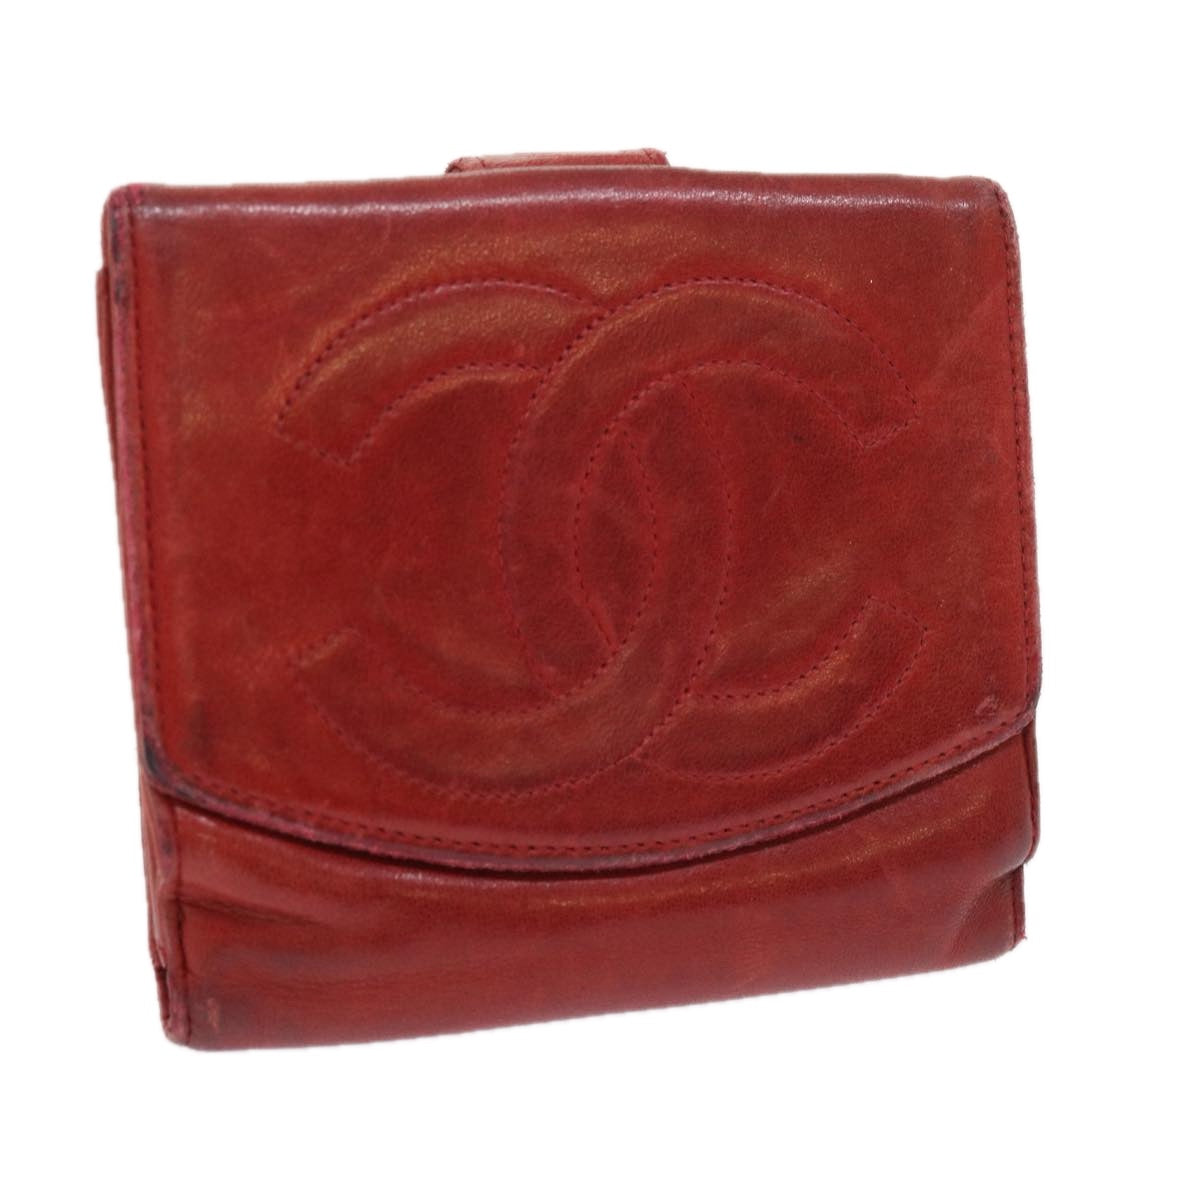 CHANEL Wallet Lamb Skin Red CC Auth yt987